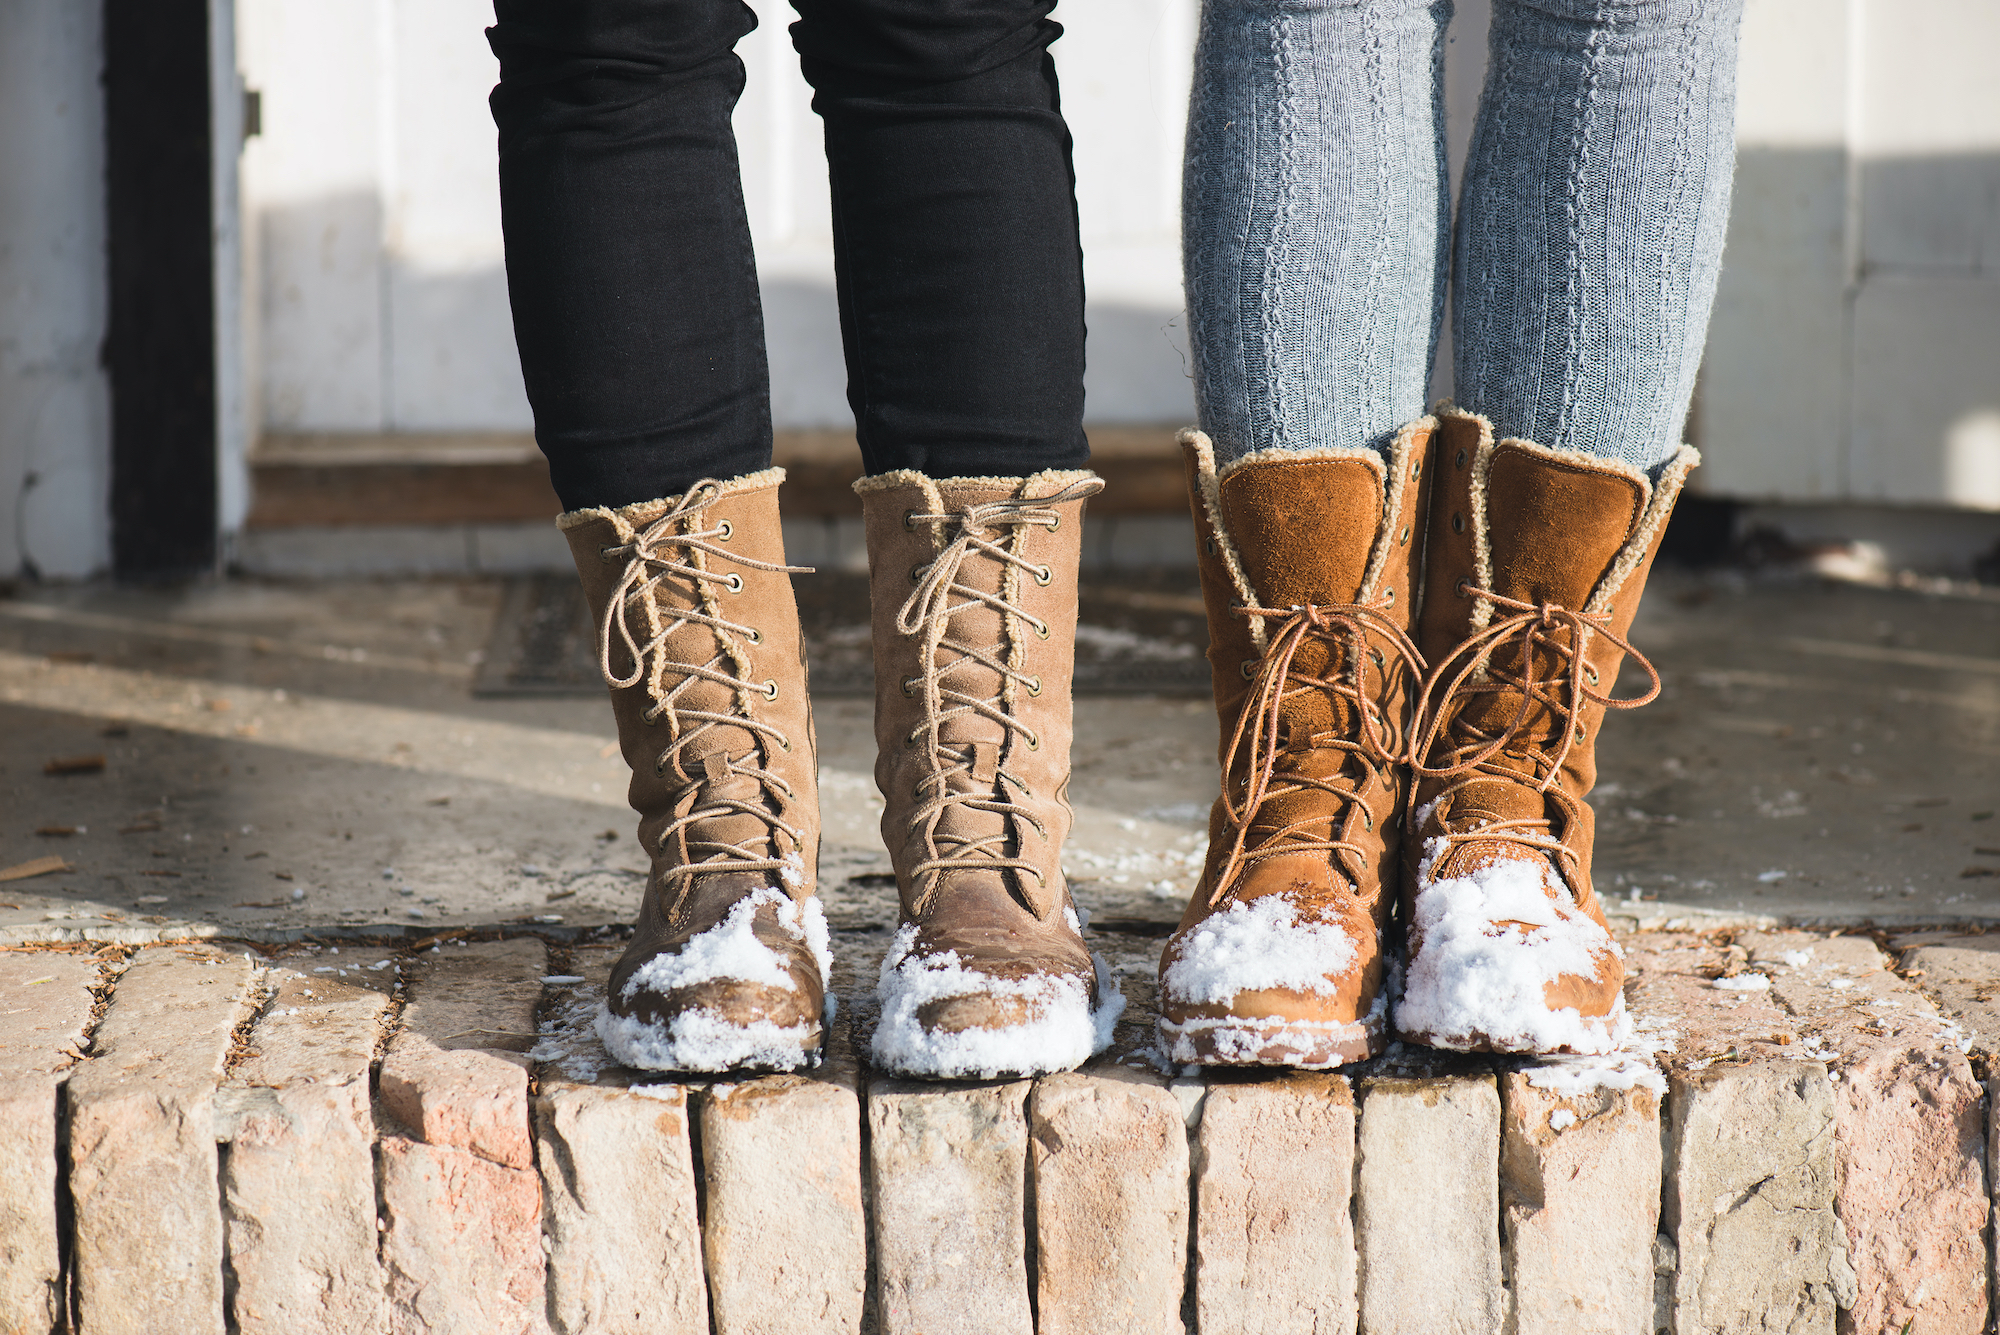 buy ugg boots for cheap